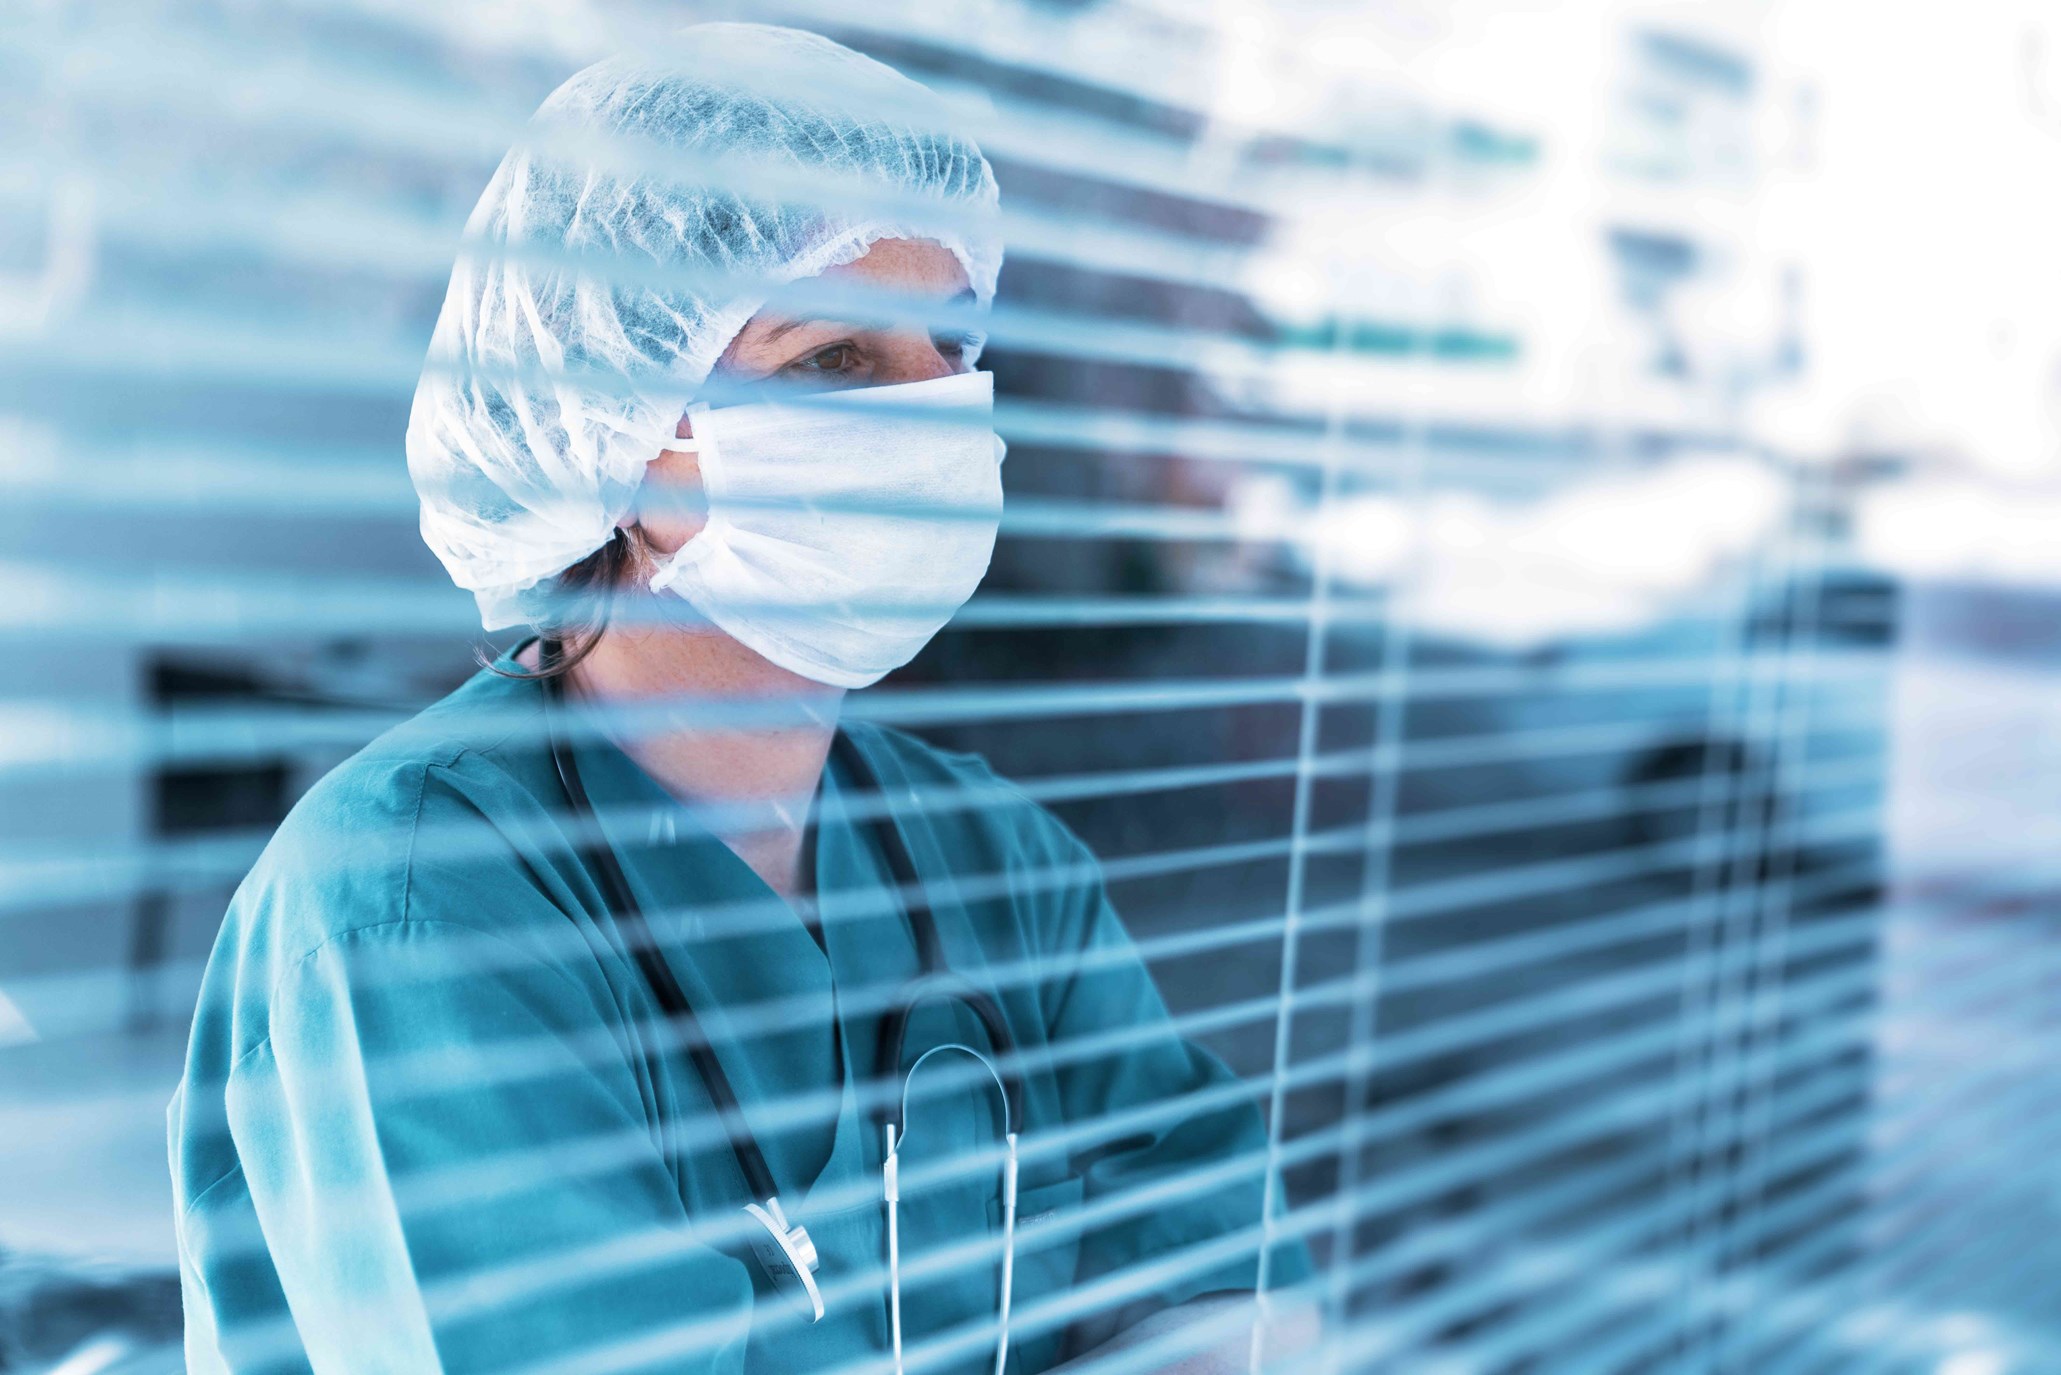 Caregiver wearing scrubs, a stethoscope, a surgical mask, and a surgical cap looking through a window